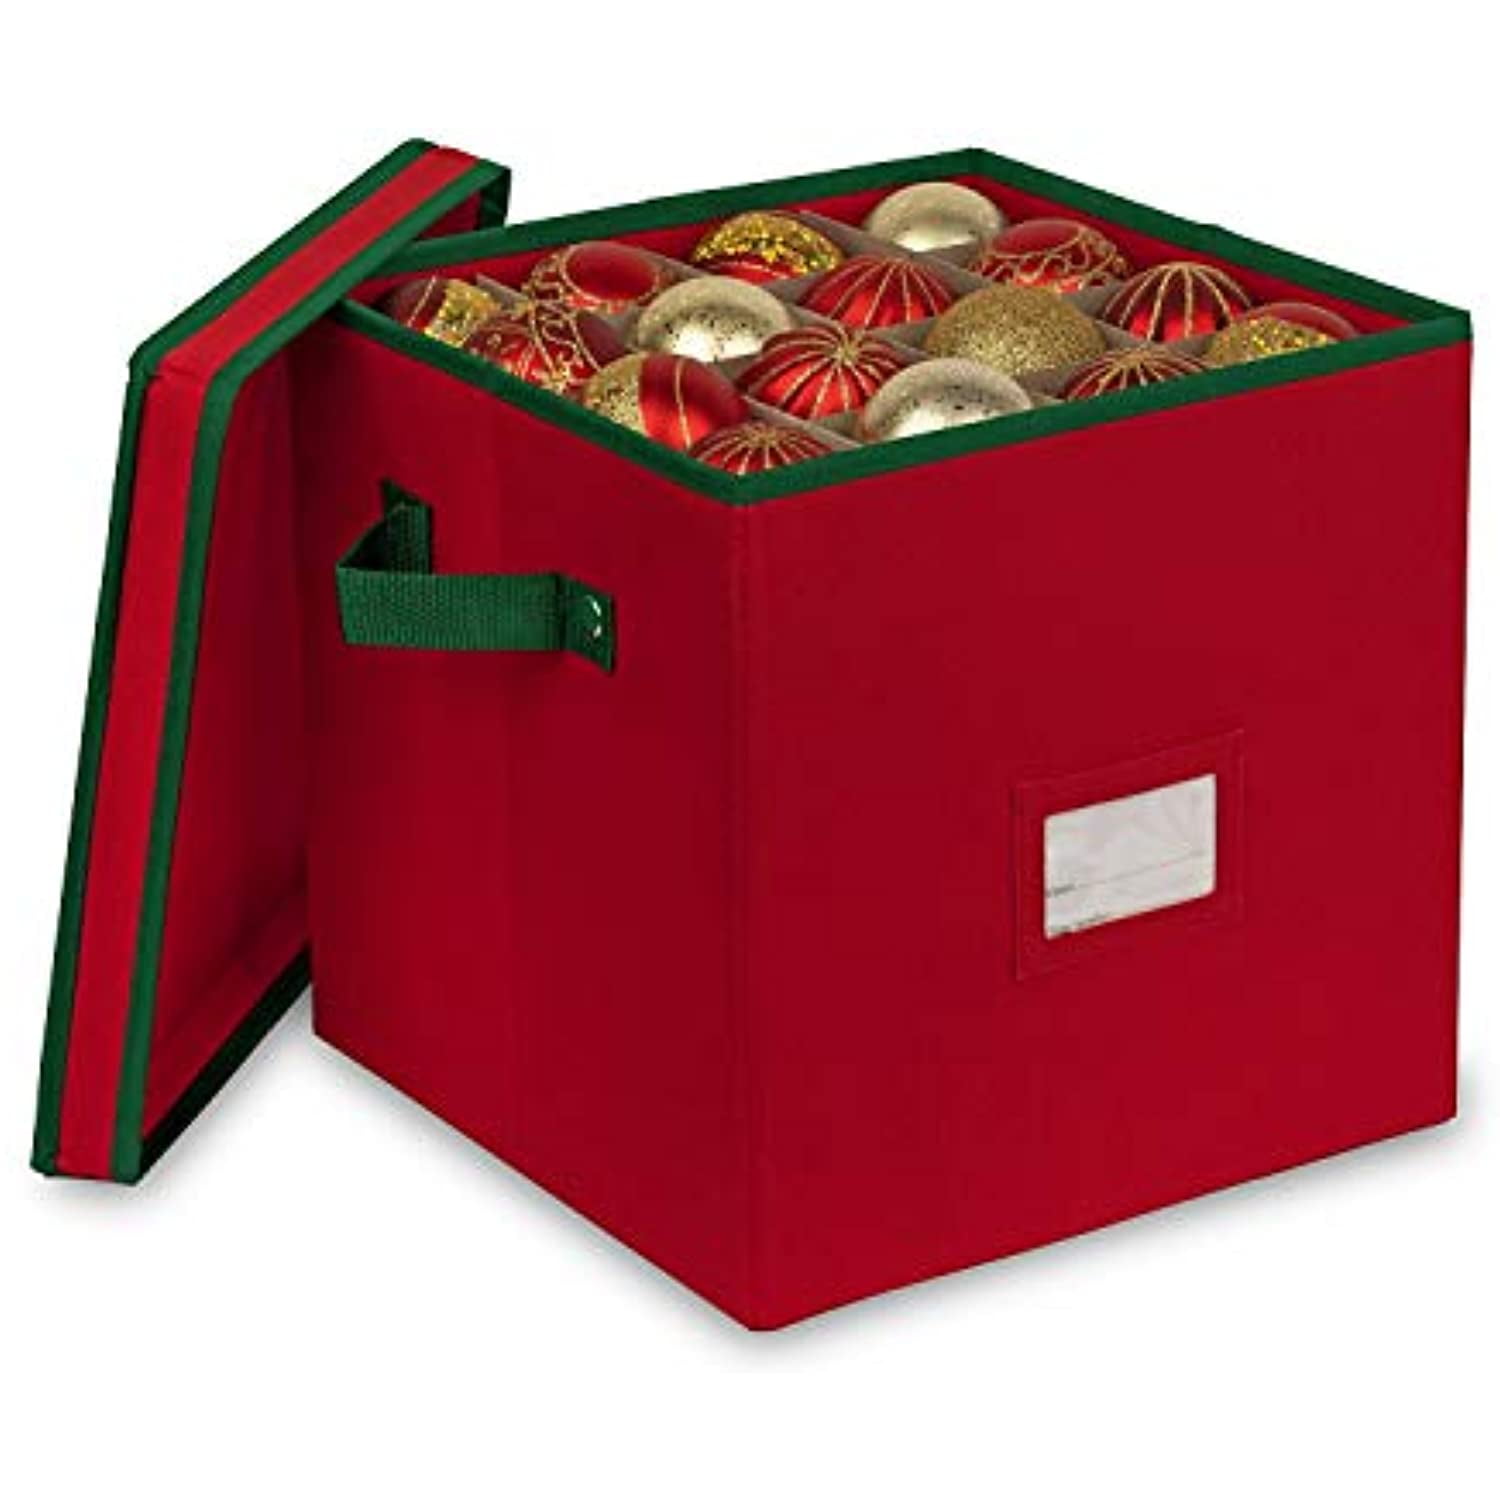 Sattiyrch Christmas Ornament Storage Box,600D Oxford Fabric Stores Up-To 64 Standard Holiday Ornaments Holder,12 x 12 inch 4